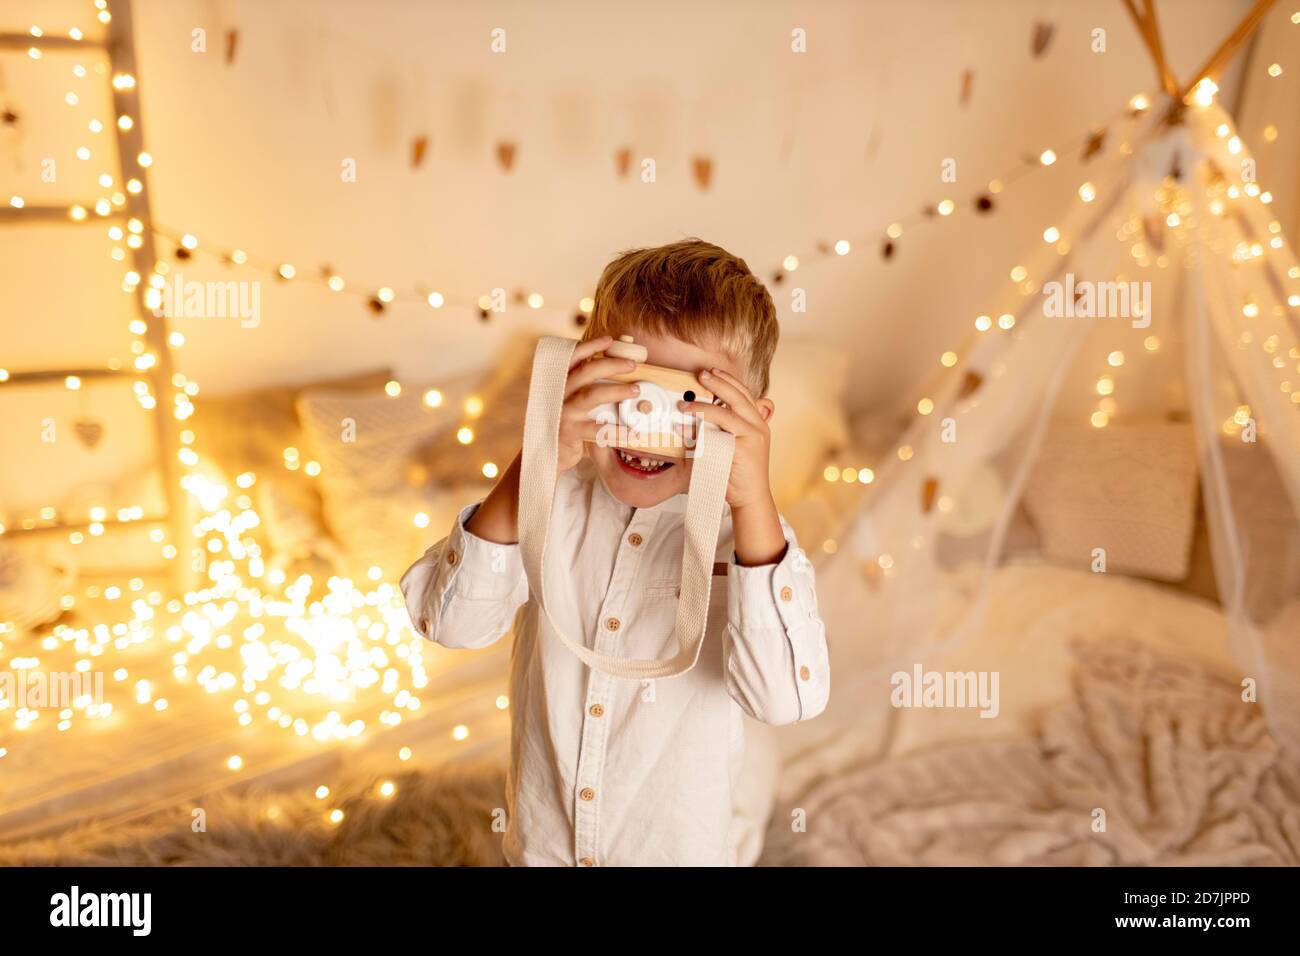 Cute blond boy playing with toy camera in room Stock Photo